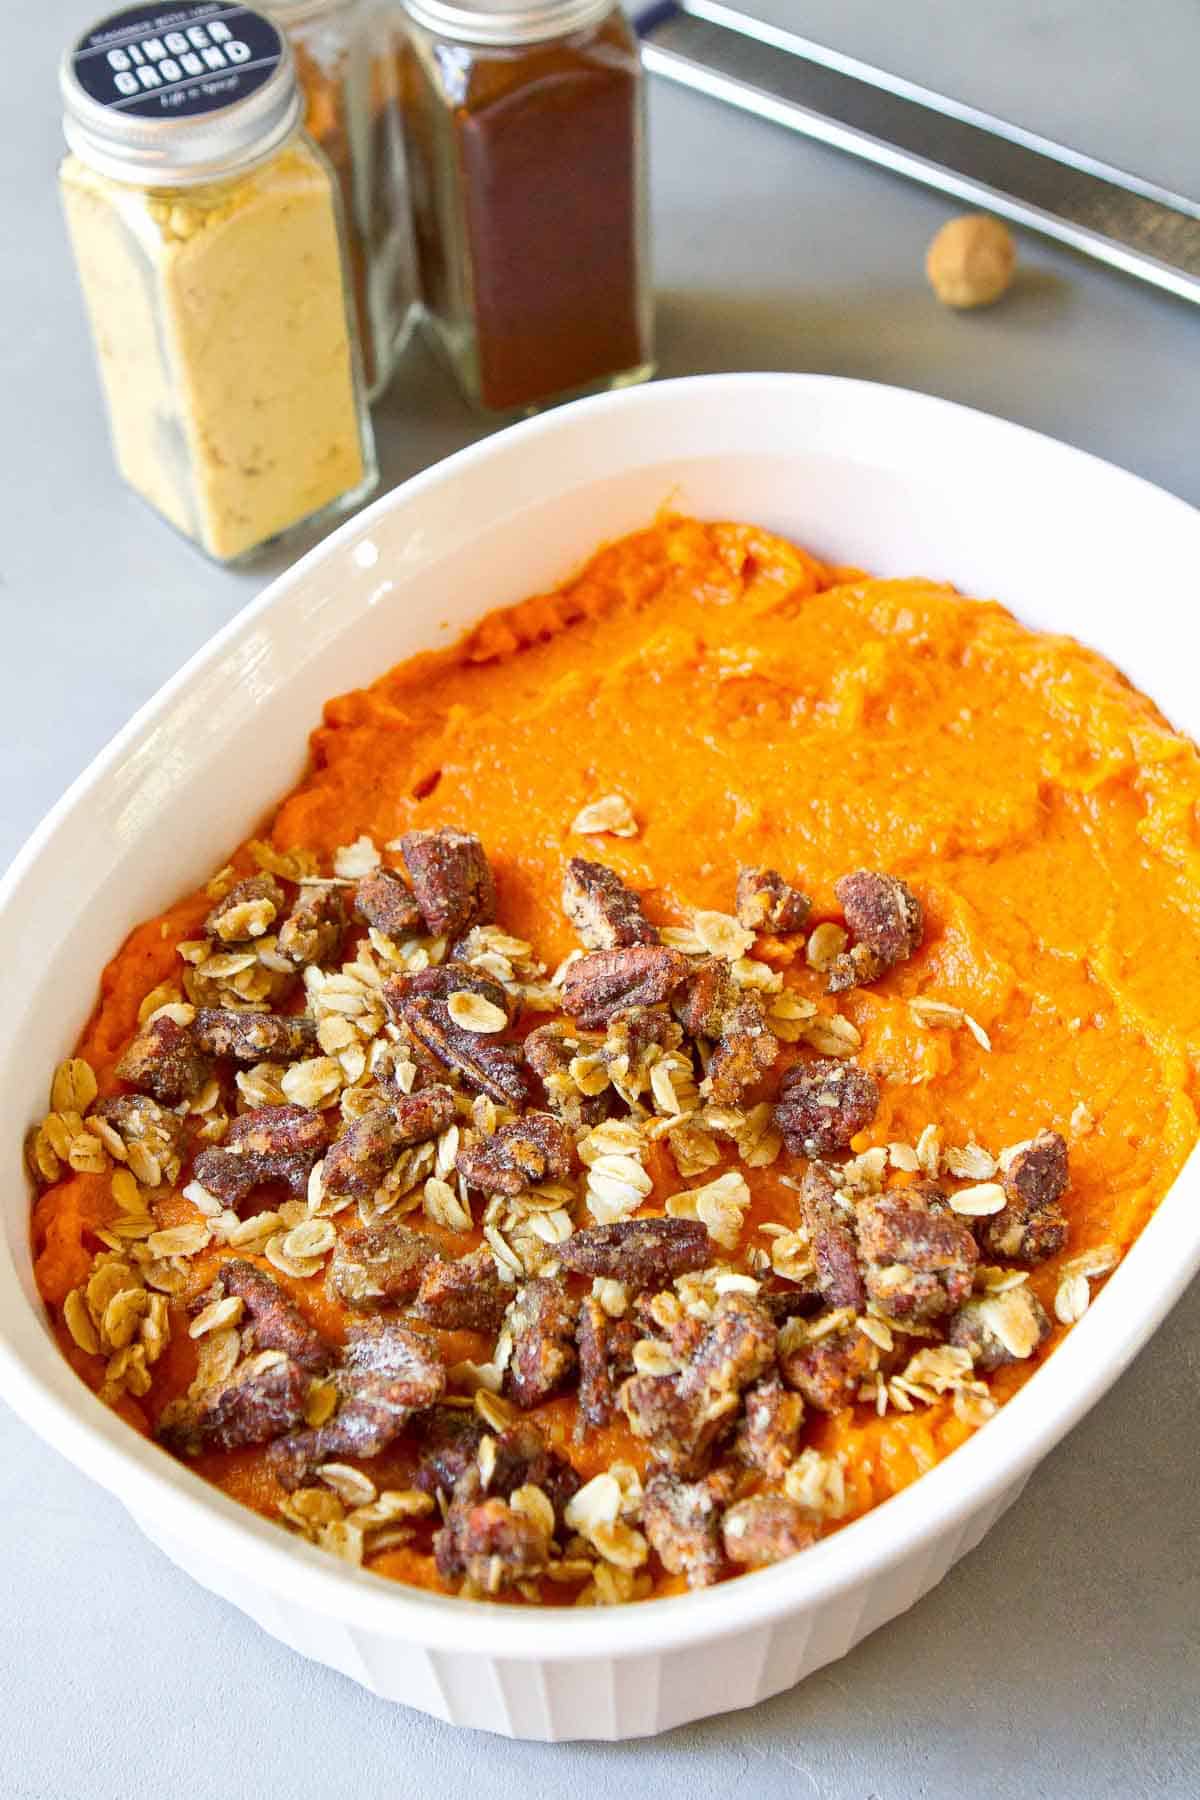 Mashed sweet potatoes in a white baking dish, partially covered with a pecan streusel topping. Spice bottles on the side.